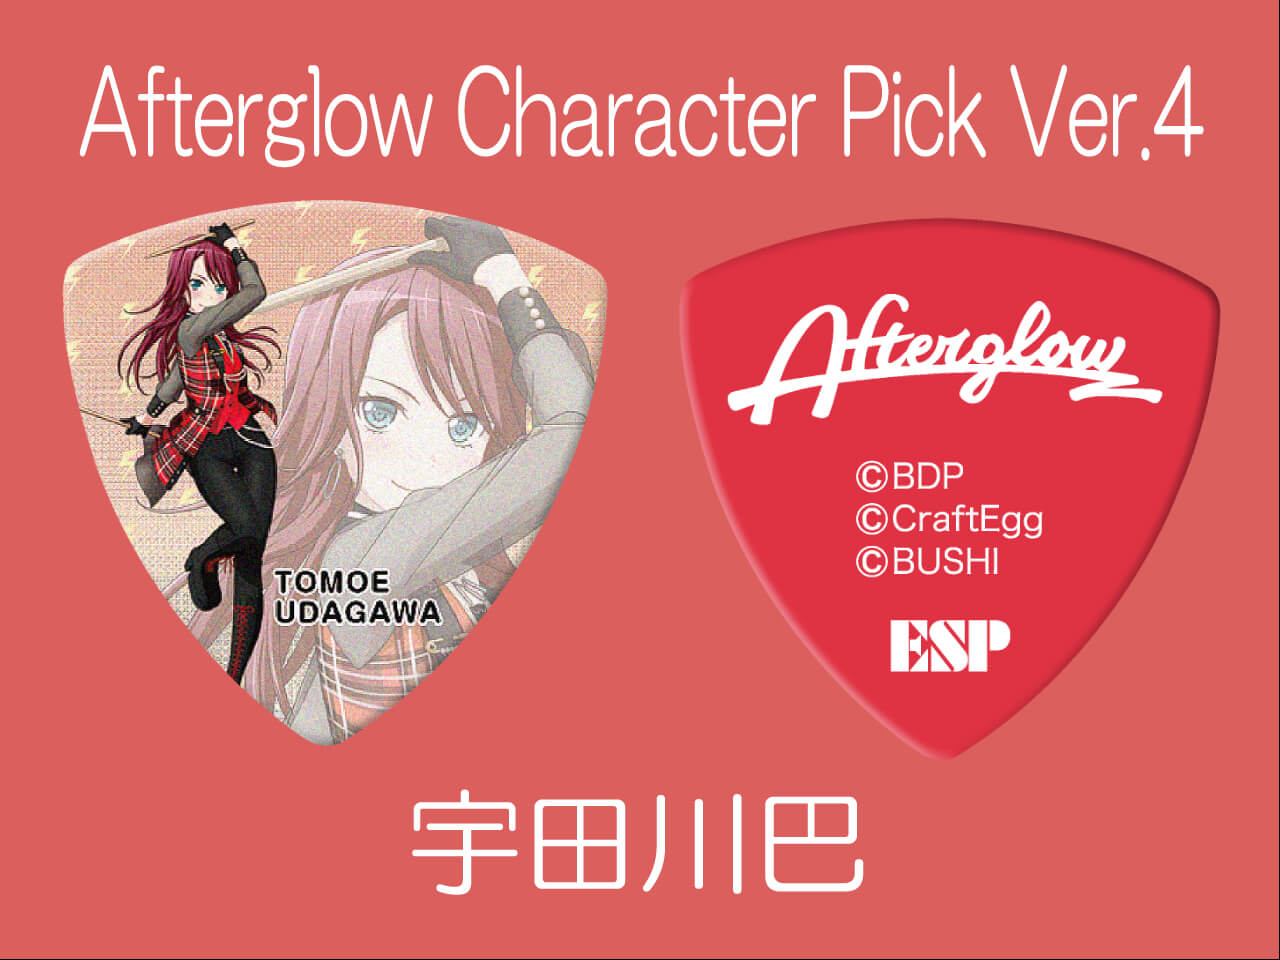 【ESP×BanG Dream!コラボピック】Afterglow Character Pick Ver.4 "宇田川巴"10枚セット（GBP TOMOE AFTERGLOW 4）